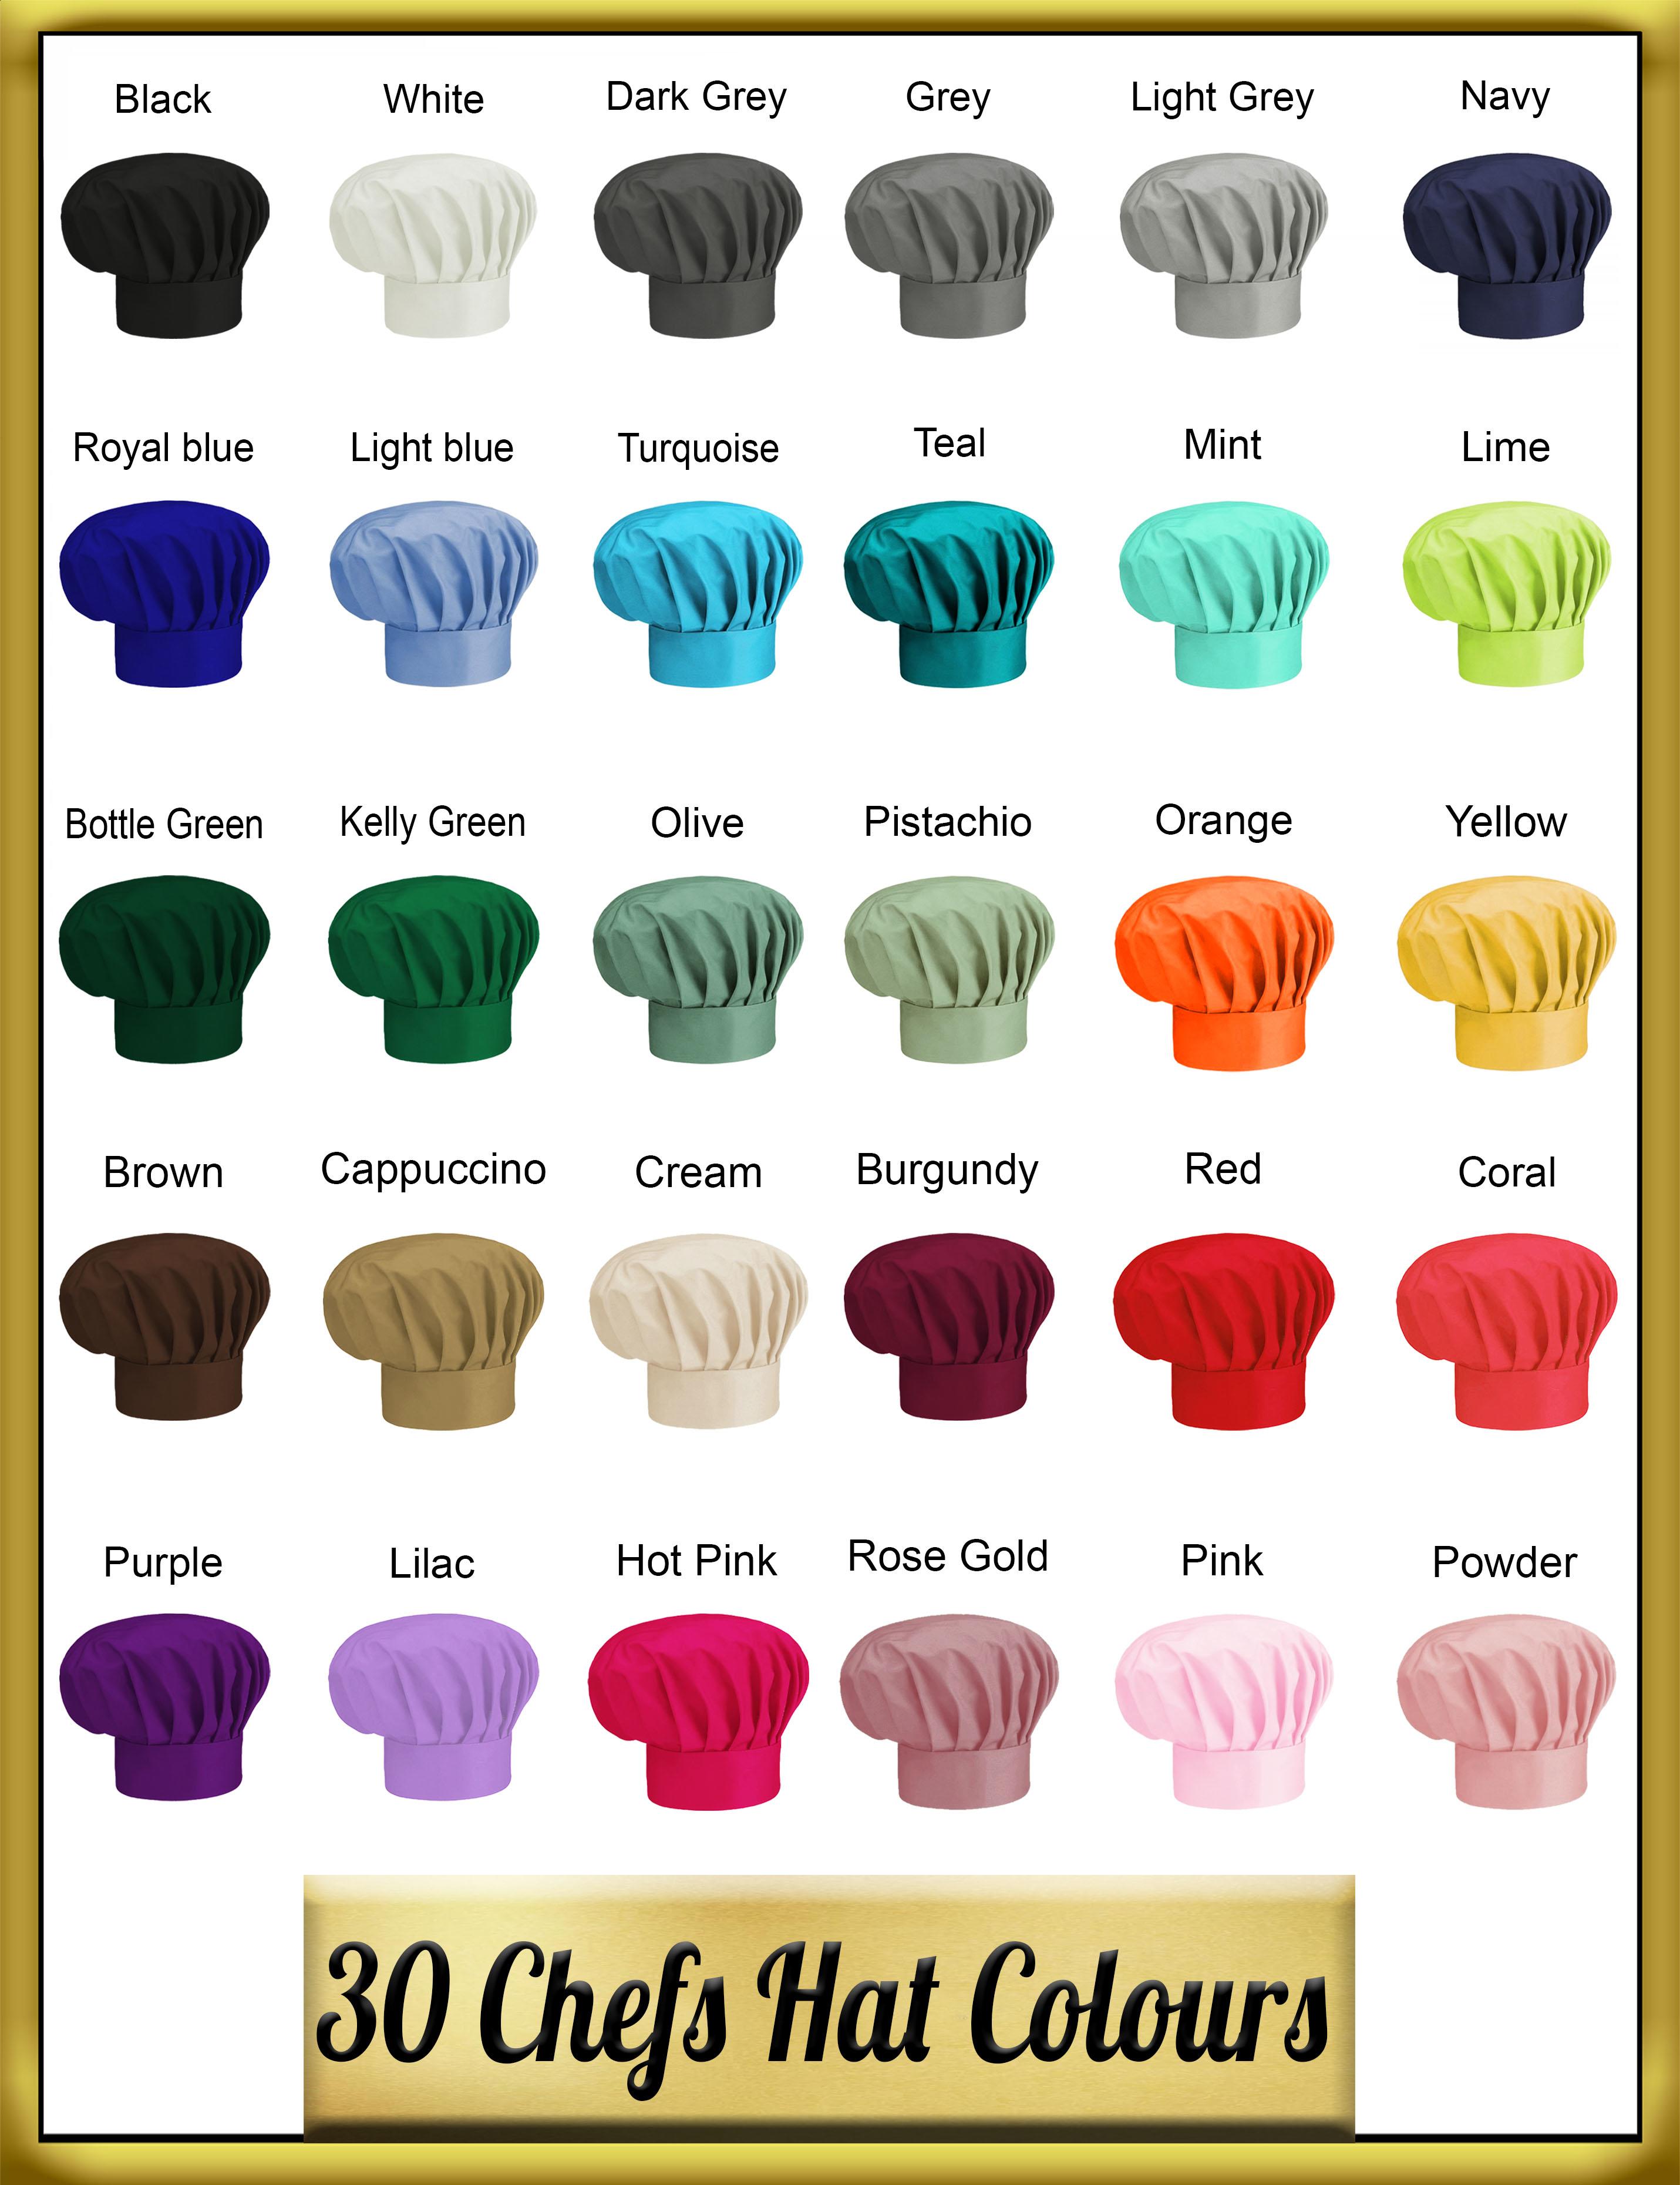 Sous Chef Chef's Hat Printed colours